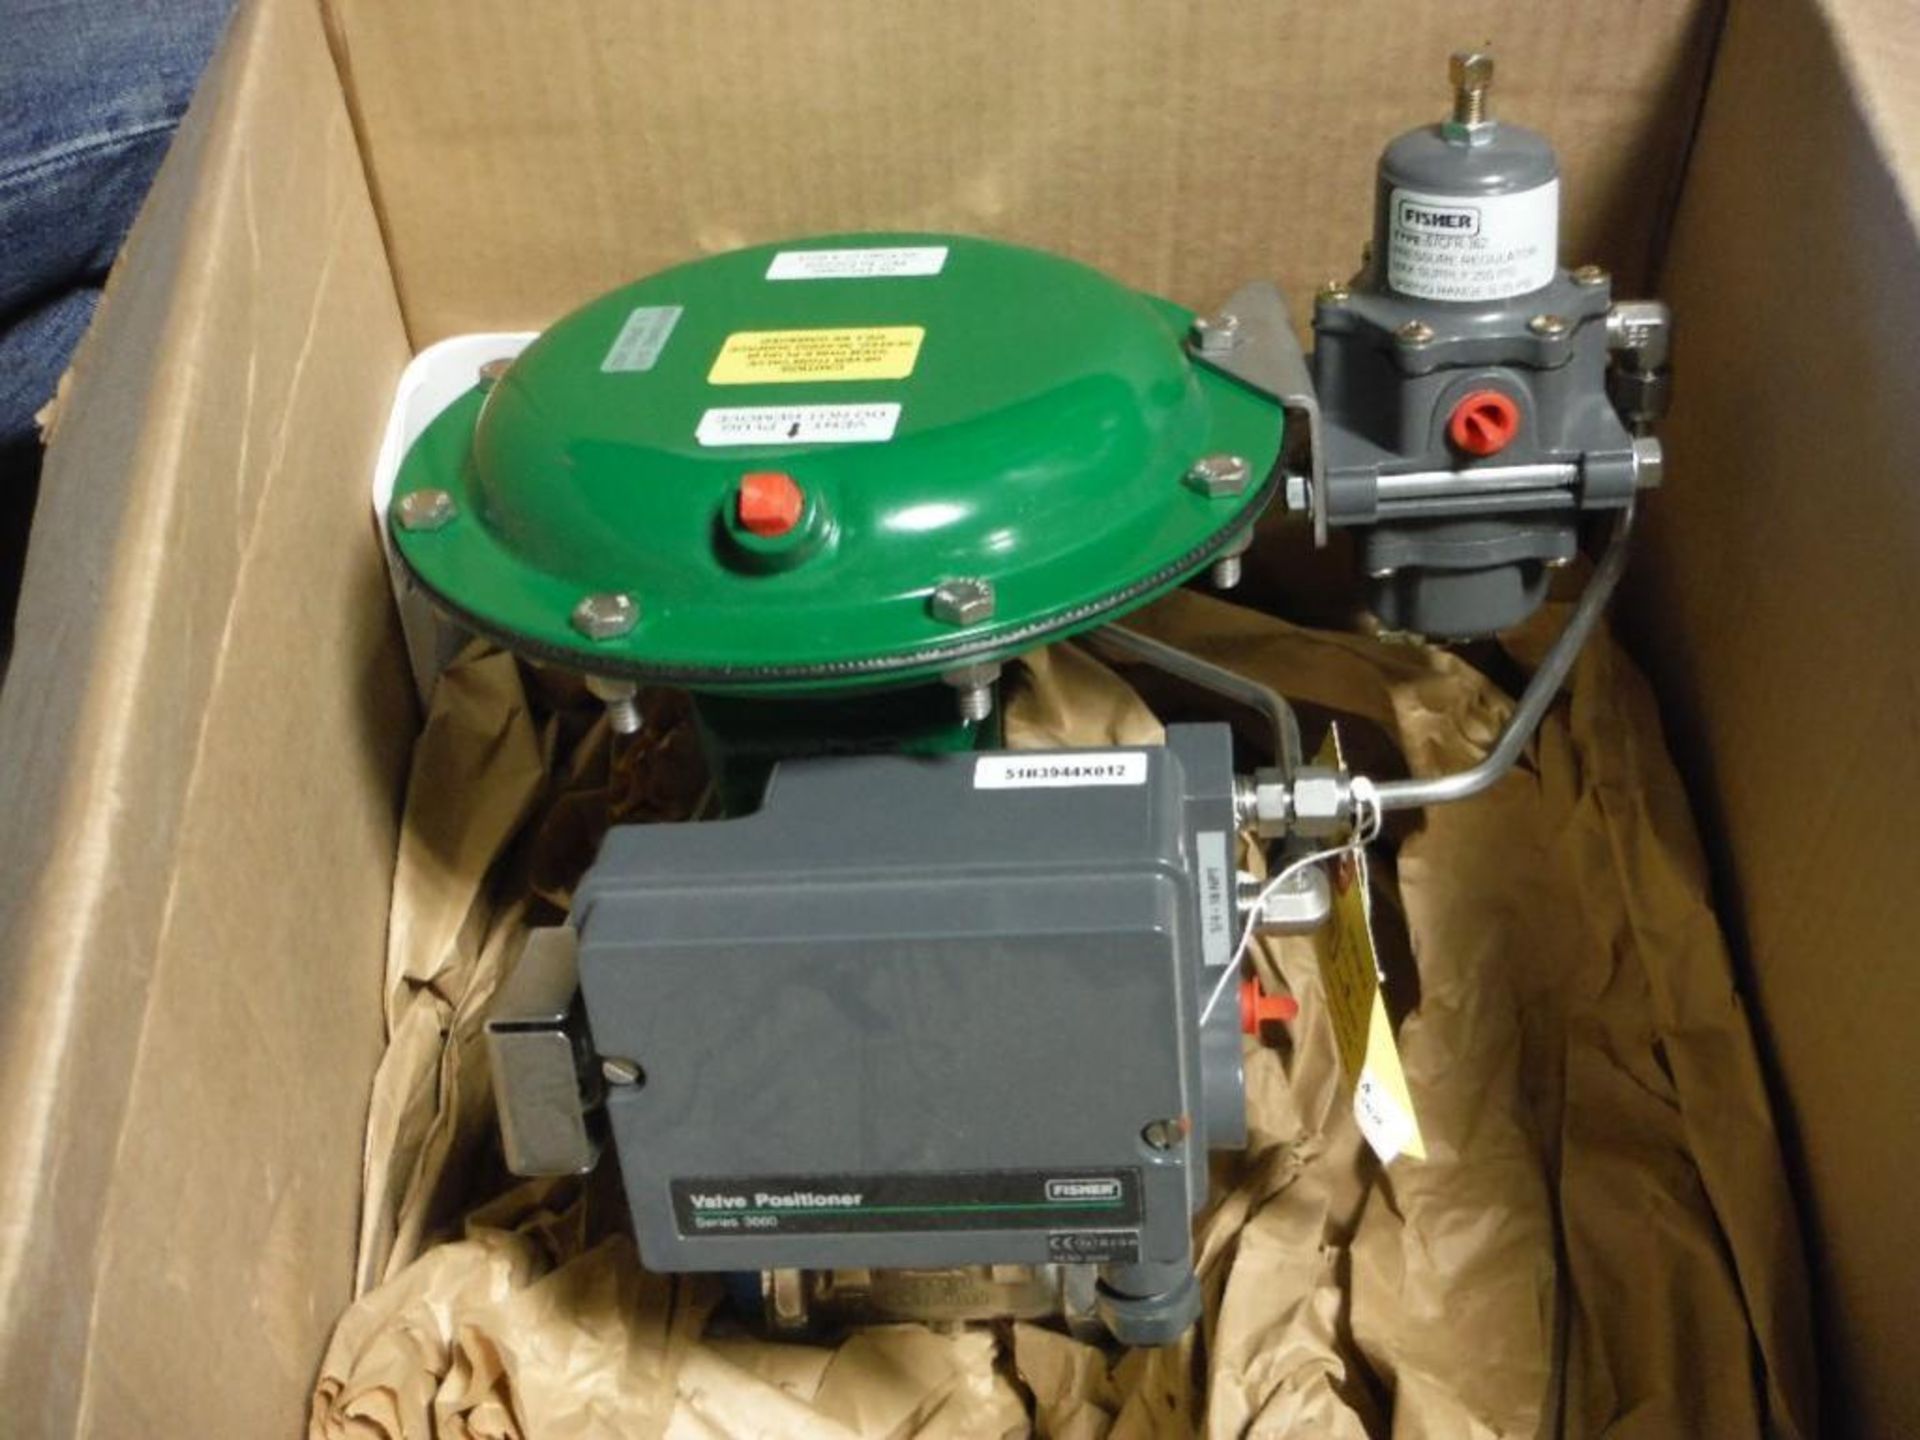 Emerson 1 in. valve with positioner, new in box. - RIGGING FEE FOR DOMESTIC TRANSPORT $25 - Image 2 of 4